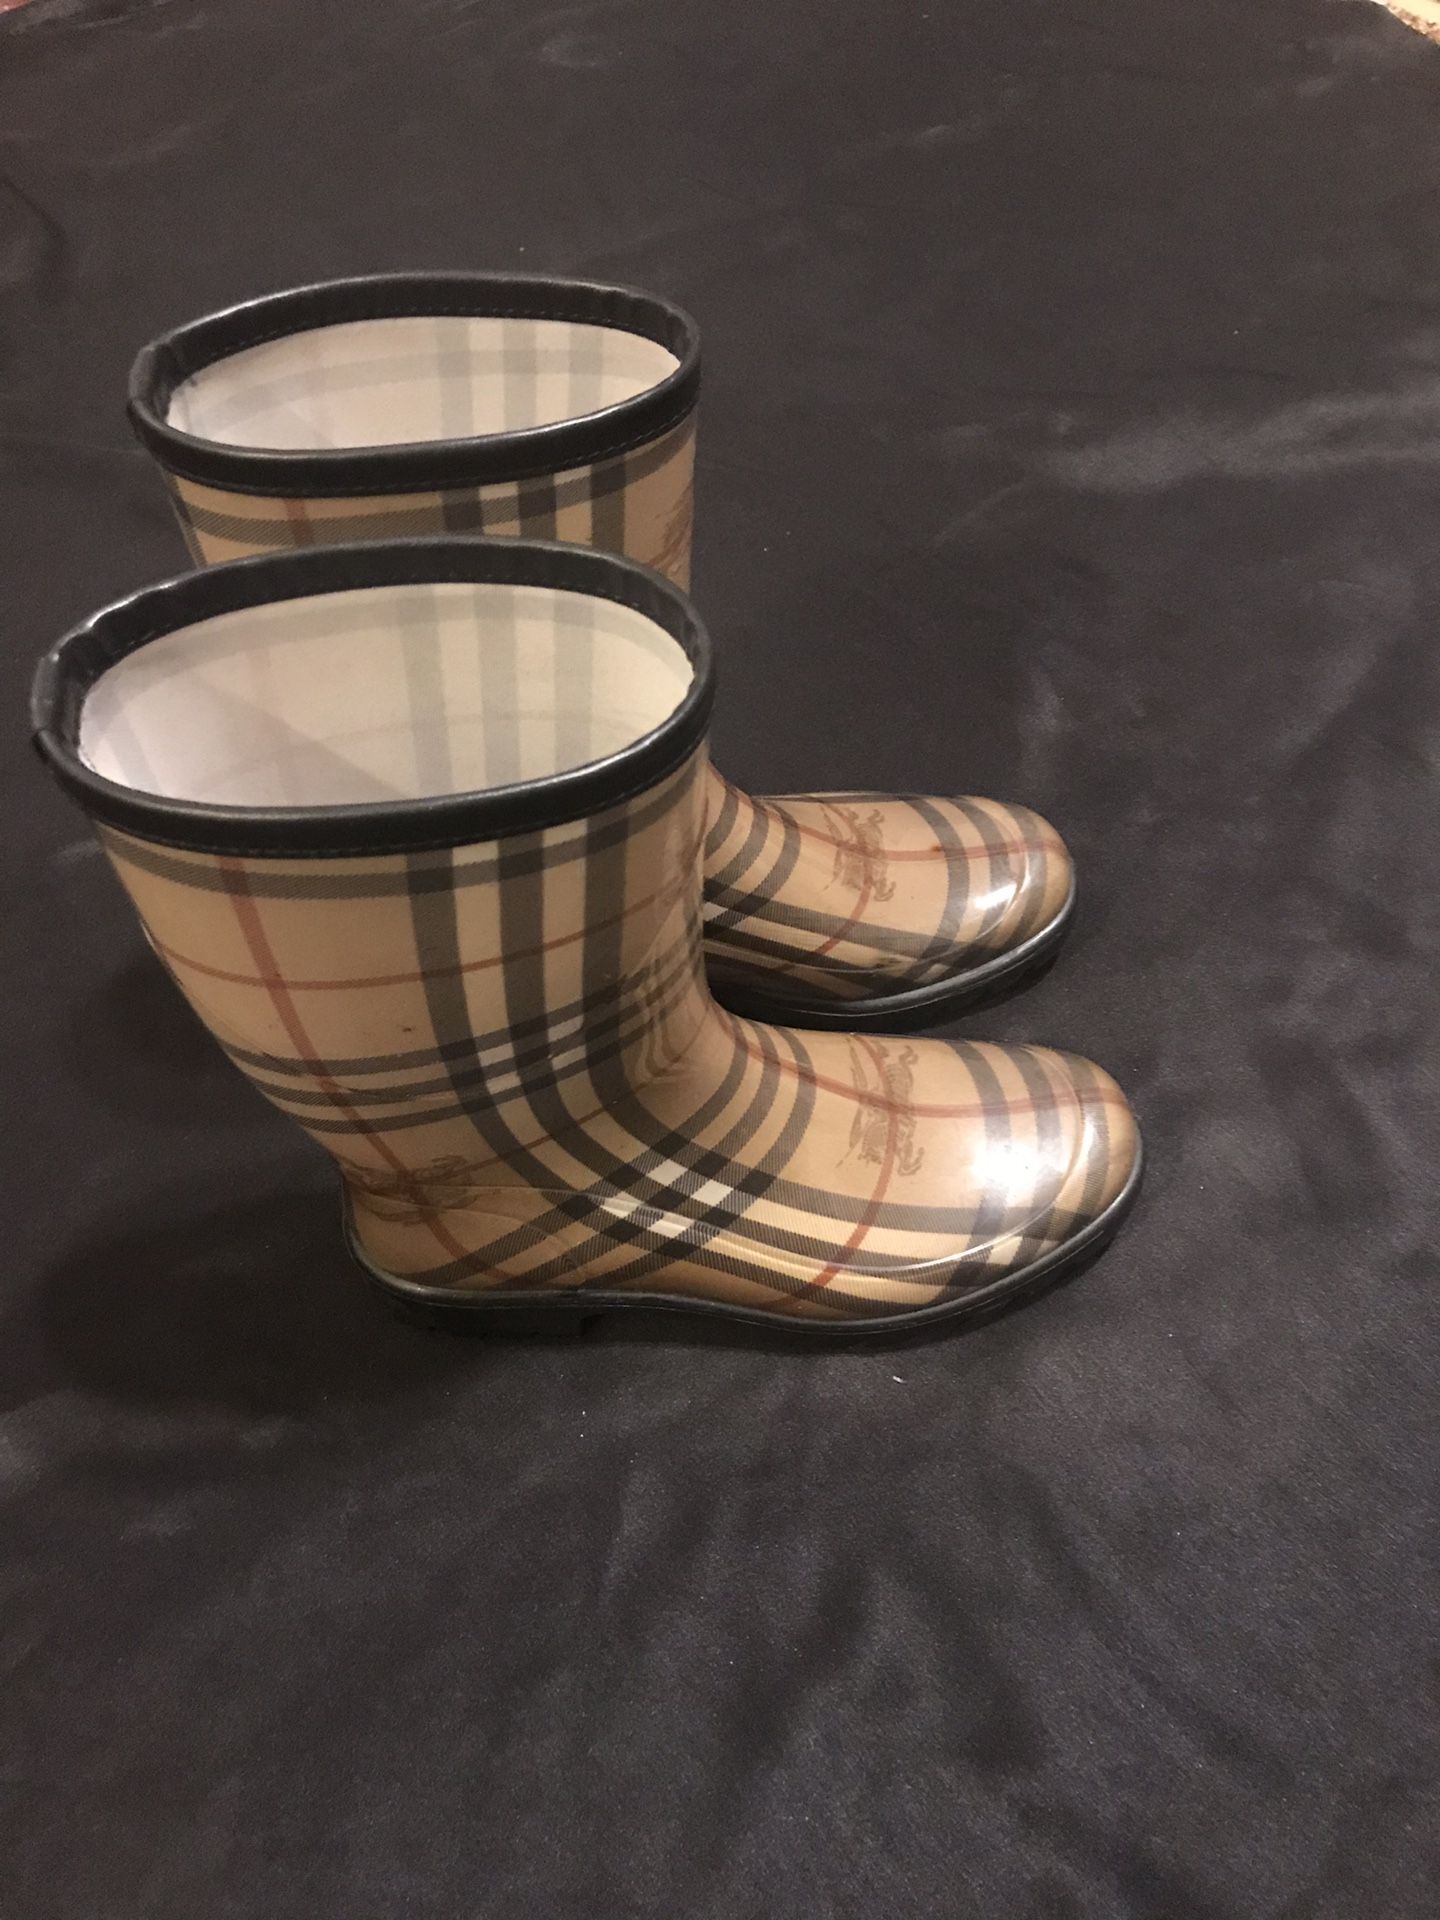 Burberry rain boots for woman Euro size 36